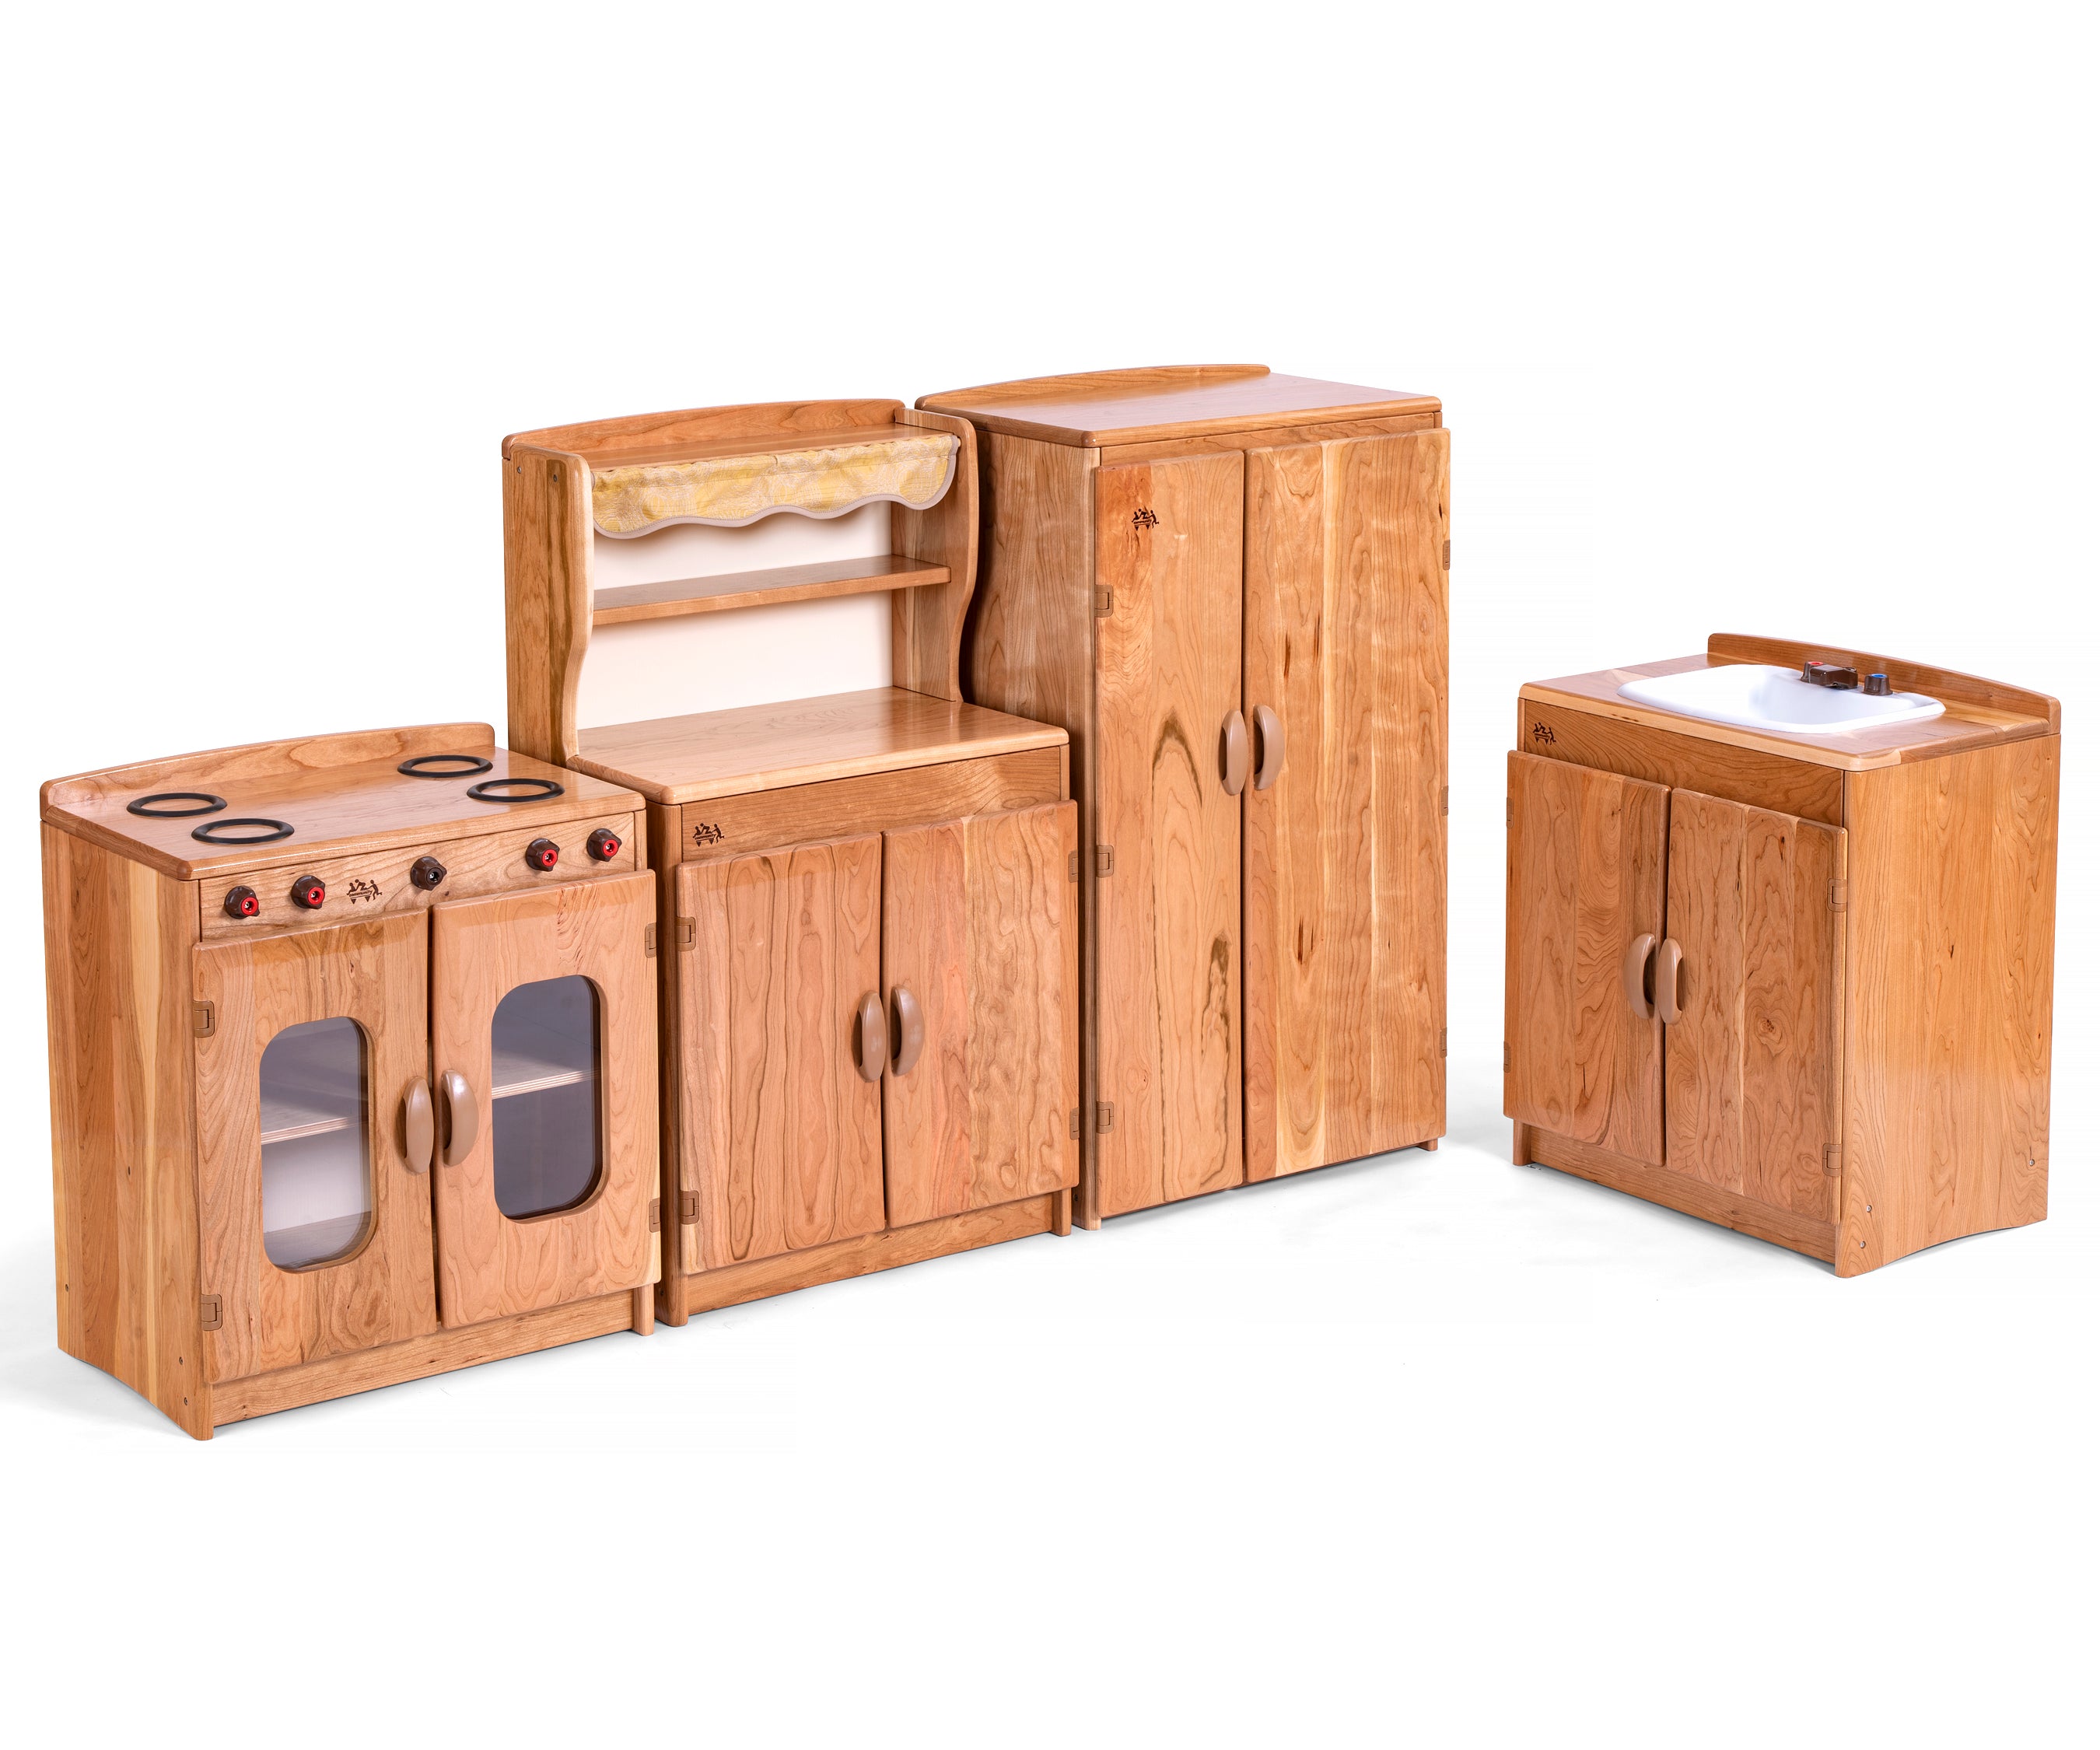 Woodcrest Complete Kitchen by Community Playthings - louisekool